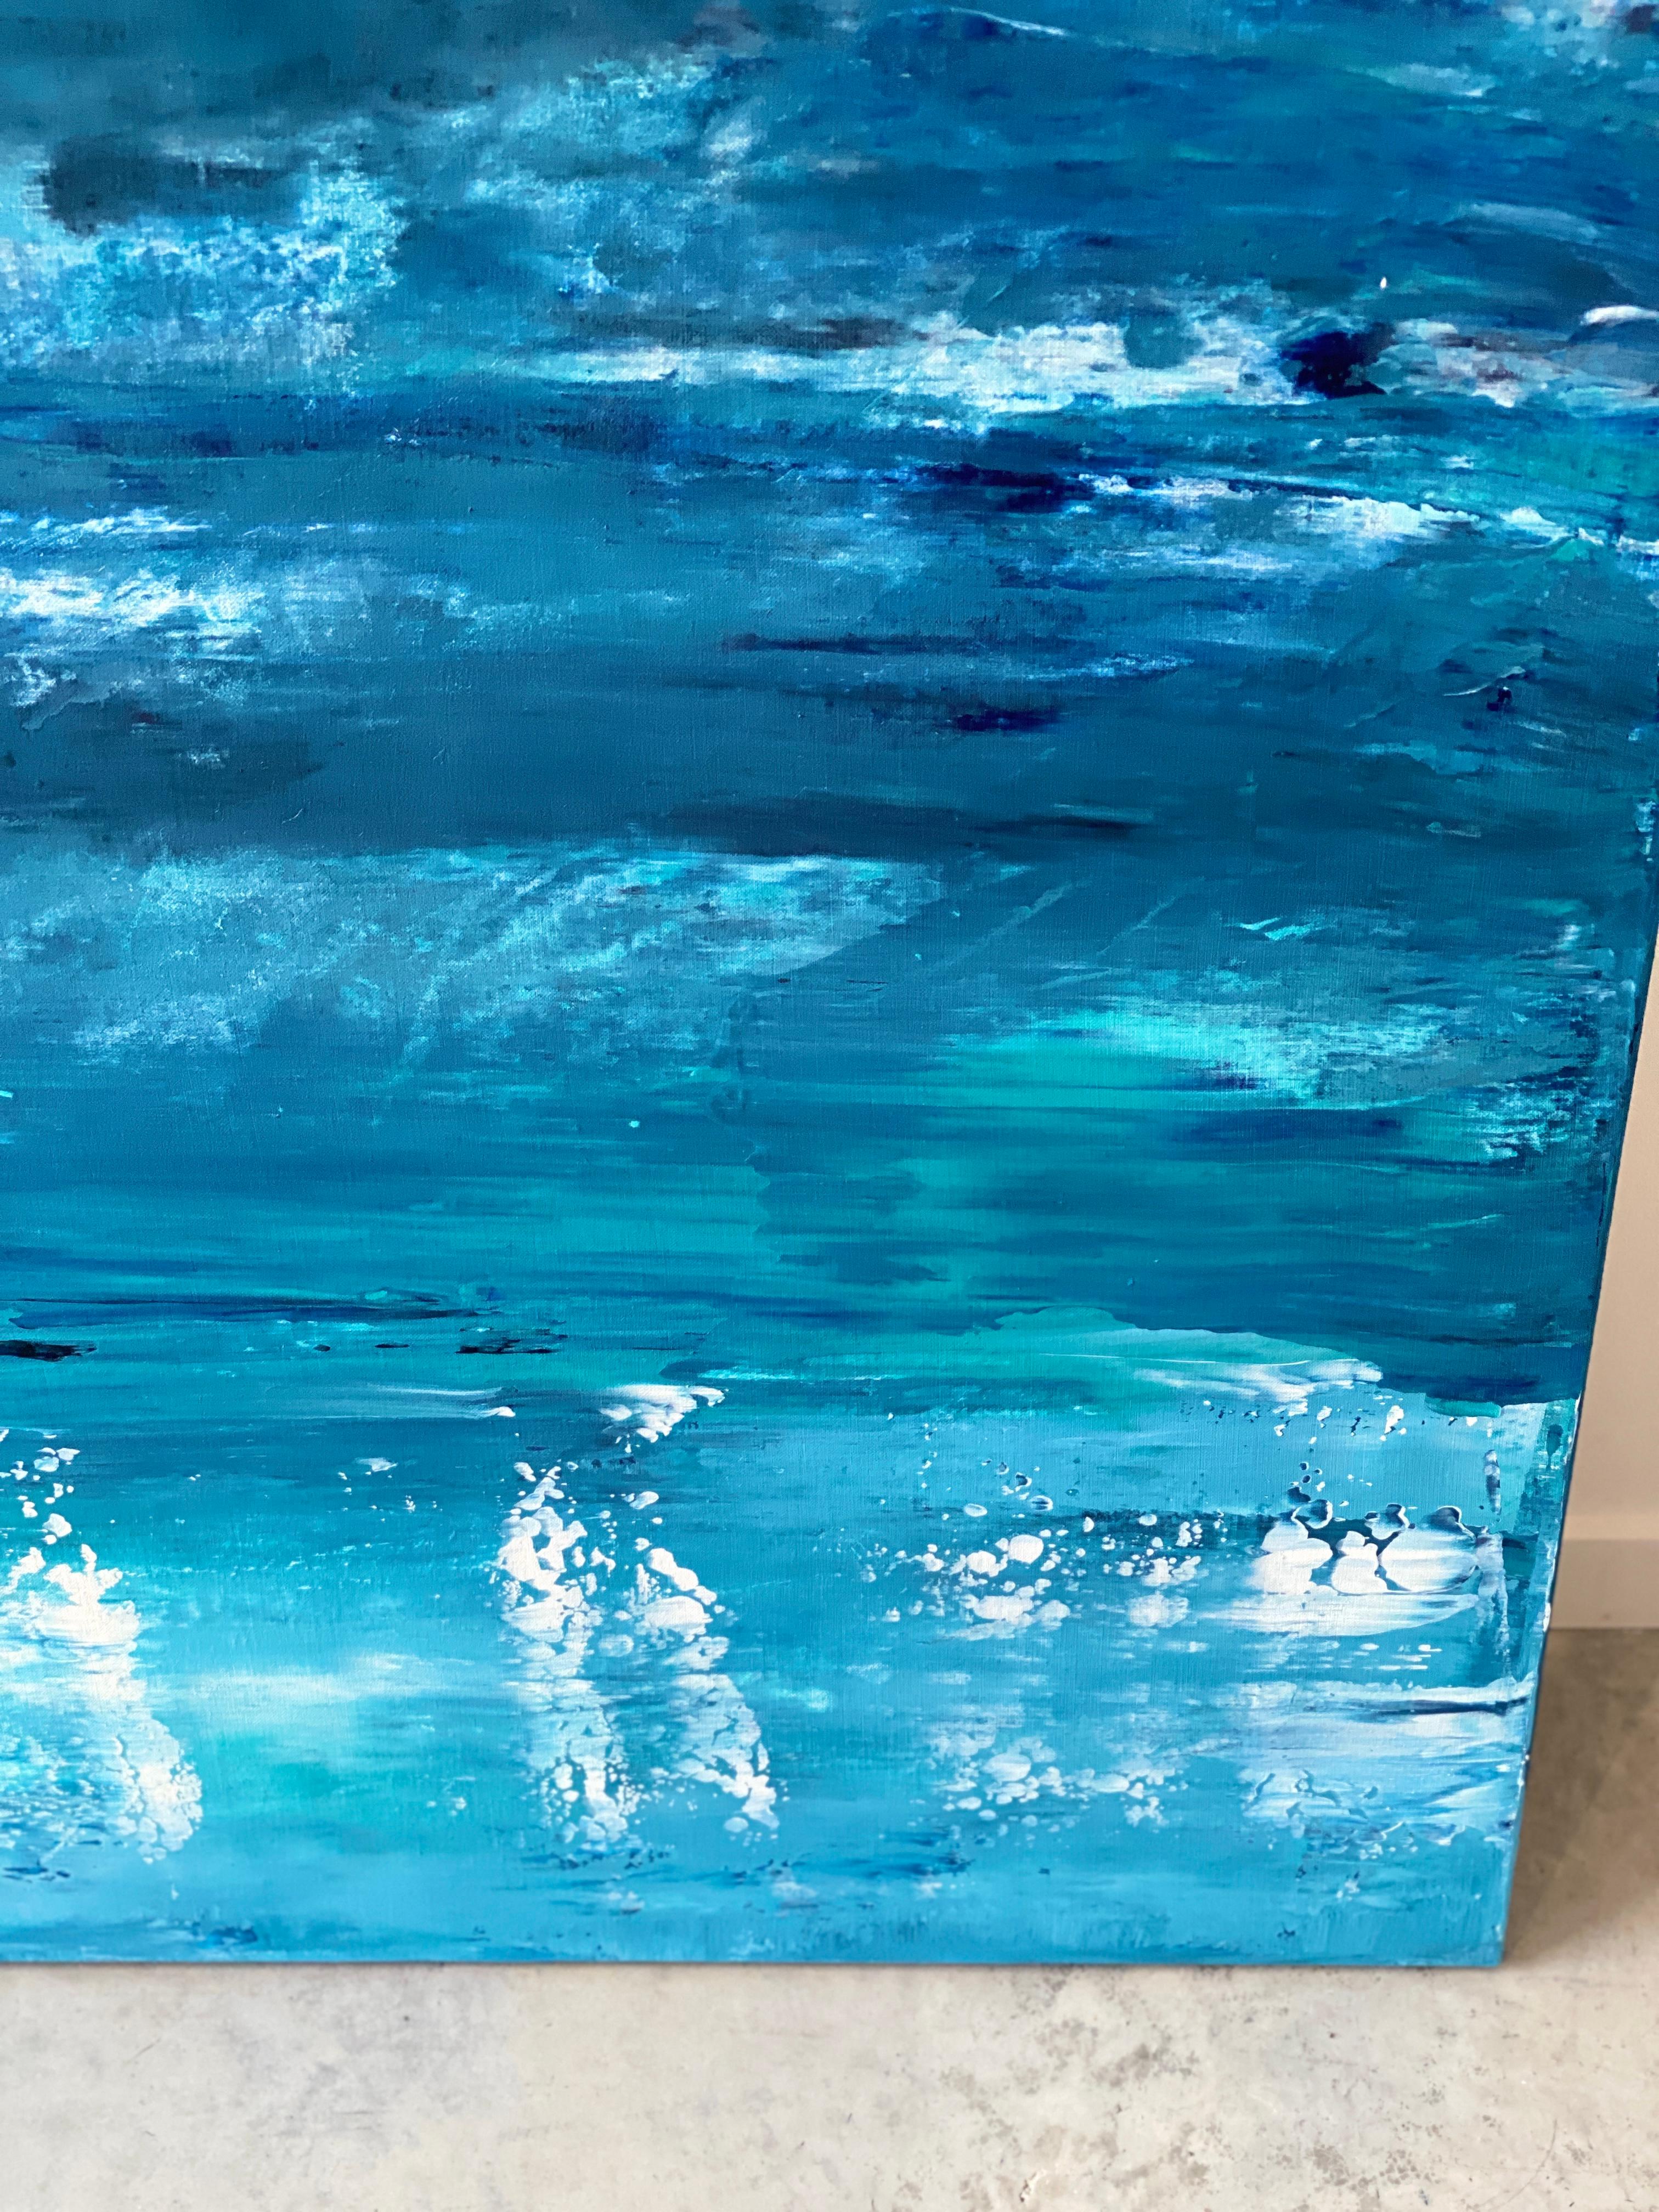 Living on the Australian coastline and ocean shores my days are inspired by the natural beauty of our waters. I find peace, calm, harmony .... that is what pushes me to paint!

This is a dynamic abstract painting, vibrant aquamarine ocean waters,